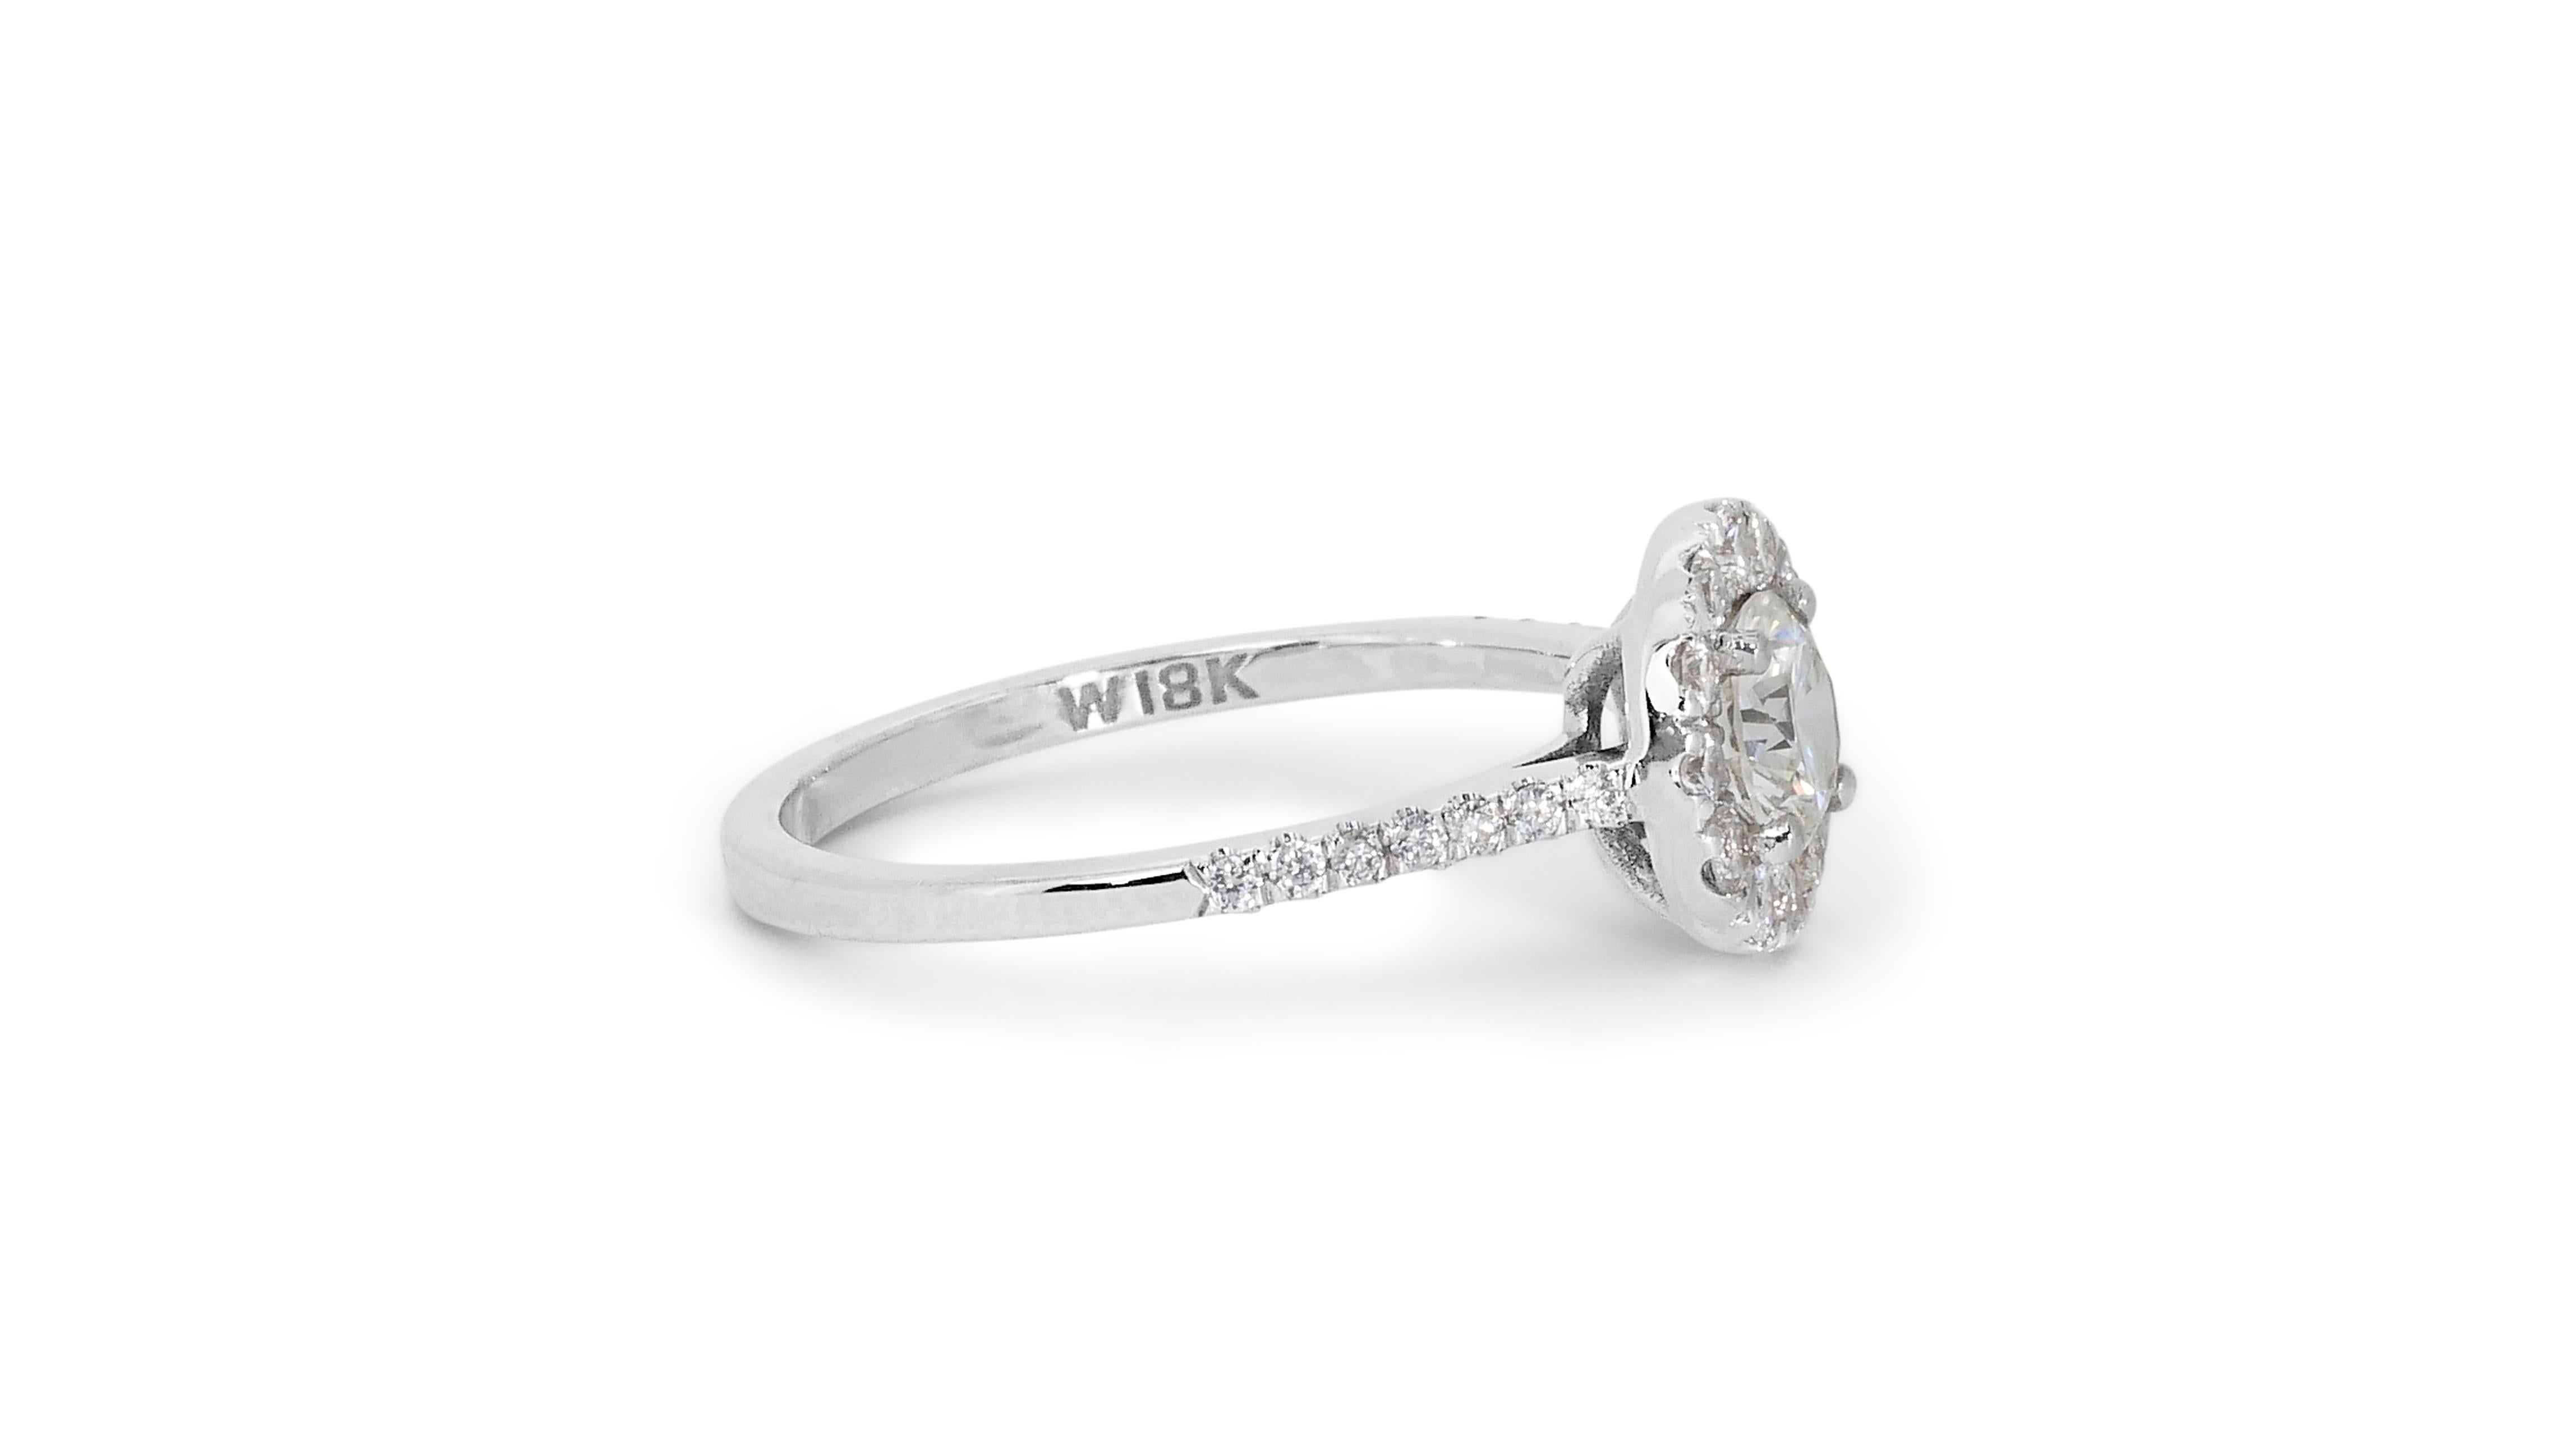 Stunning 1.35ct Diamond Halo Ring in 18k White Gold - GIA Certified For Sale 2